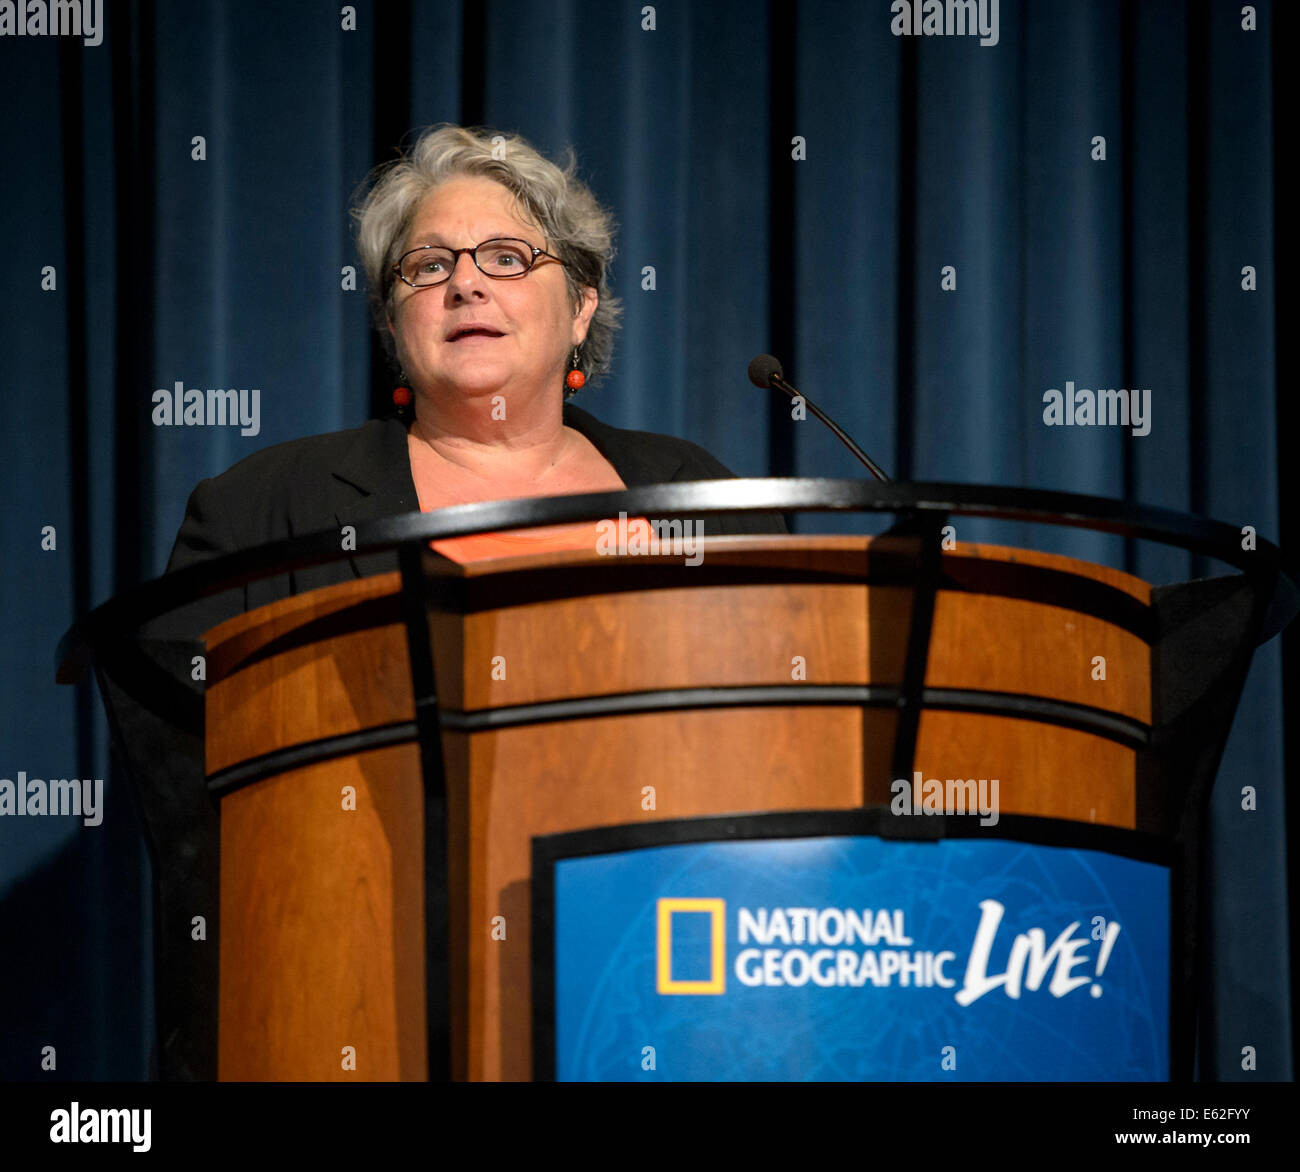 Susan Hitchcock, science editor for National Geographic books, responsible for science, nature, and health, kicks off a “Mars Up Close” panel discussion of Mars experts involved in current Mars exploration, Tuesday, August 5, 2014, at the National Geograp Stock Photo